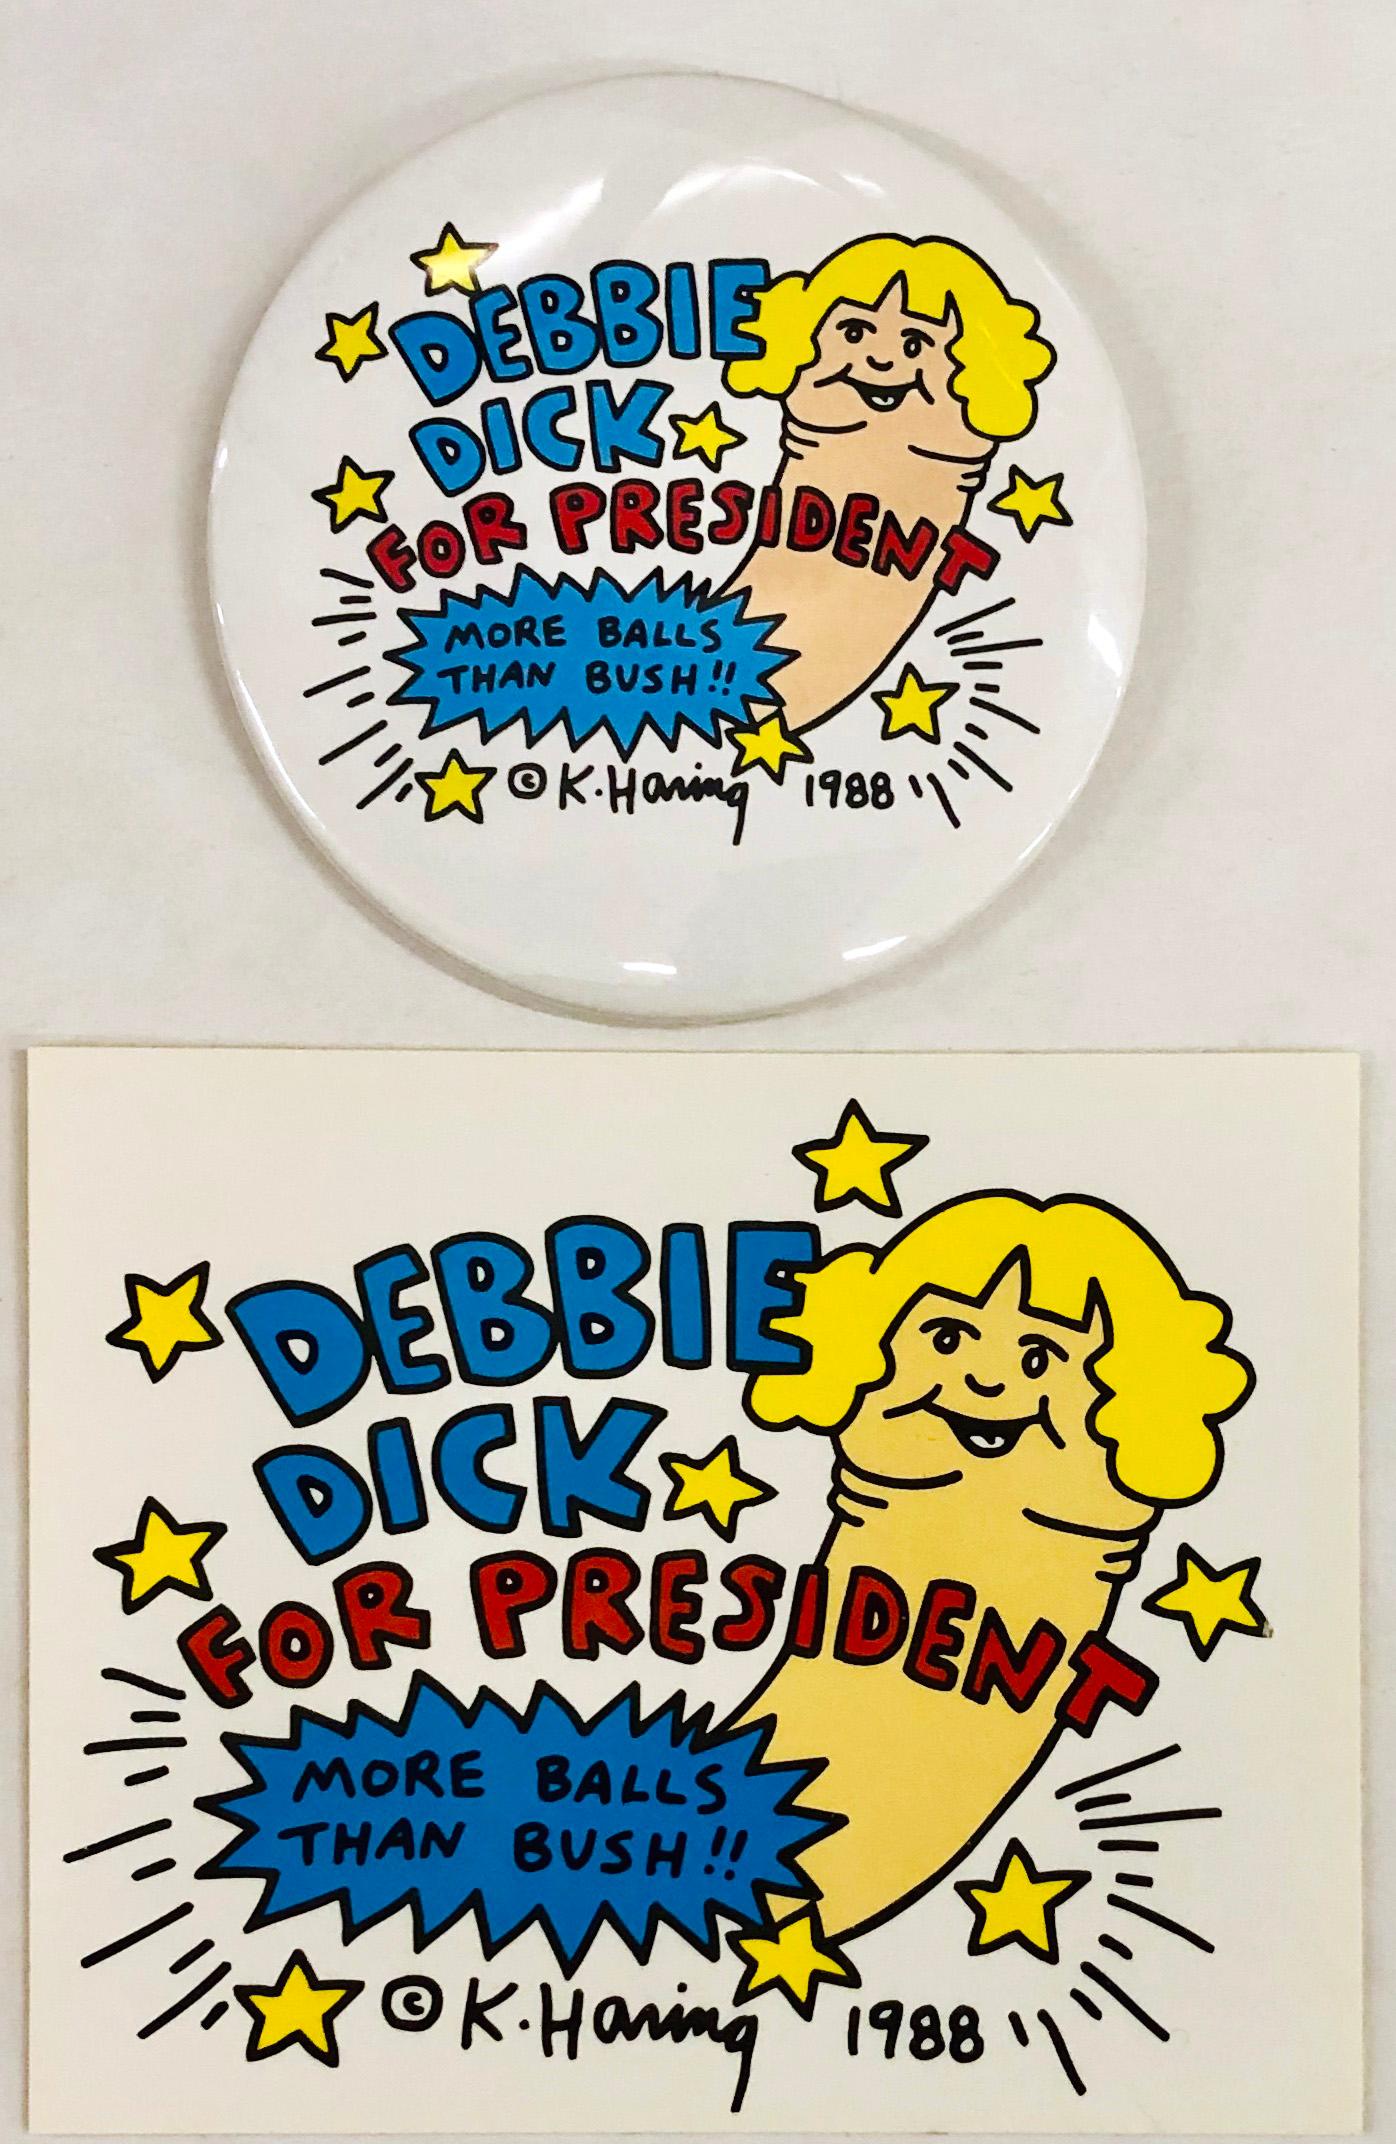 Keith Haring 'Debbie Dick' 
A set of 2 vintage 1988 Keith Haring Safe Sex promotional items:

Offset printed sticker and pin featuring a classic Keith Haring imagery.
Sticker; approx 2 x 3 inches. Pin: approx 2 x 2 in. 
Both items unused and in